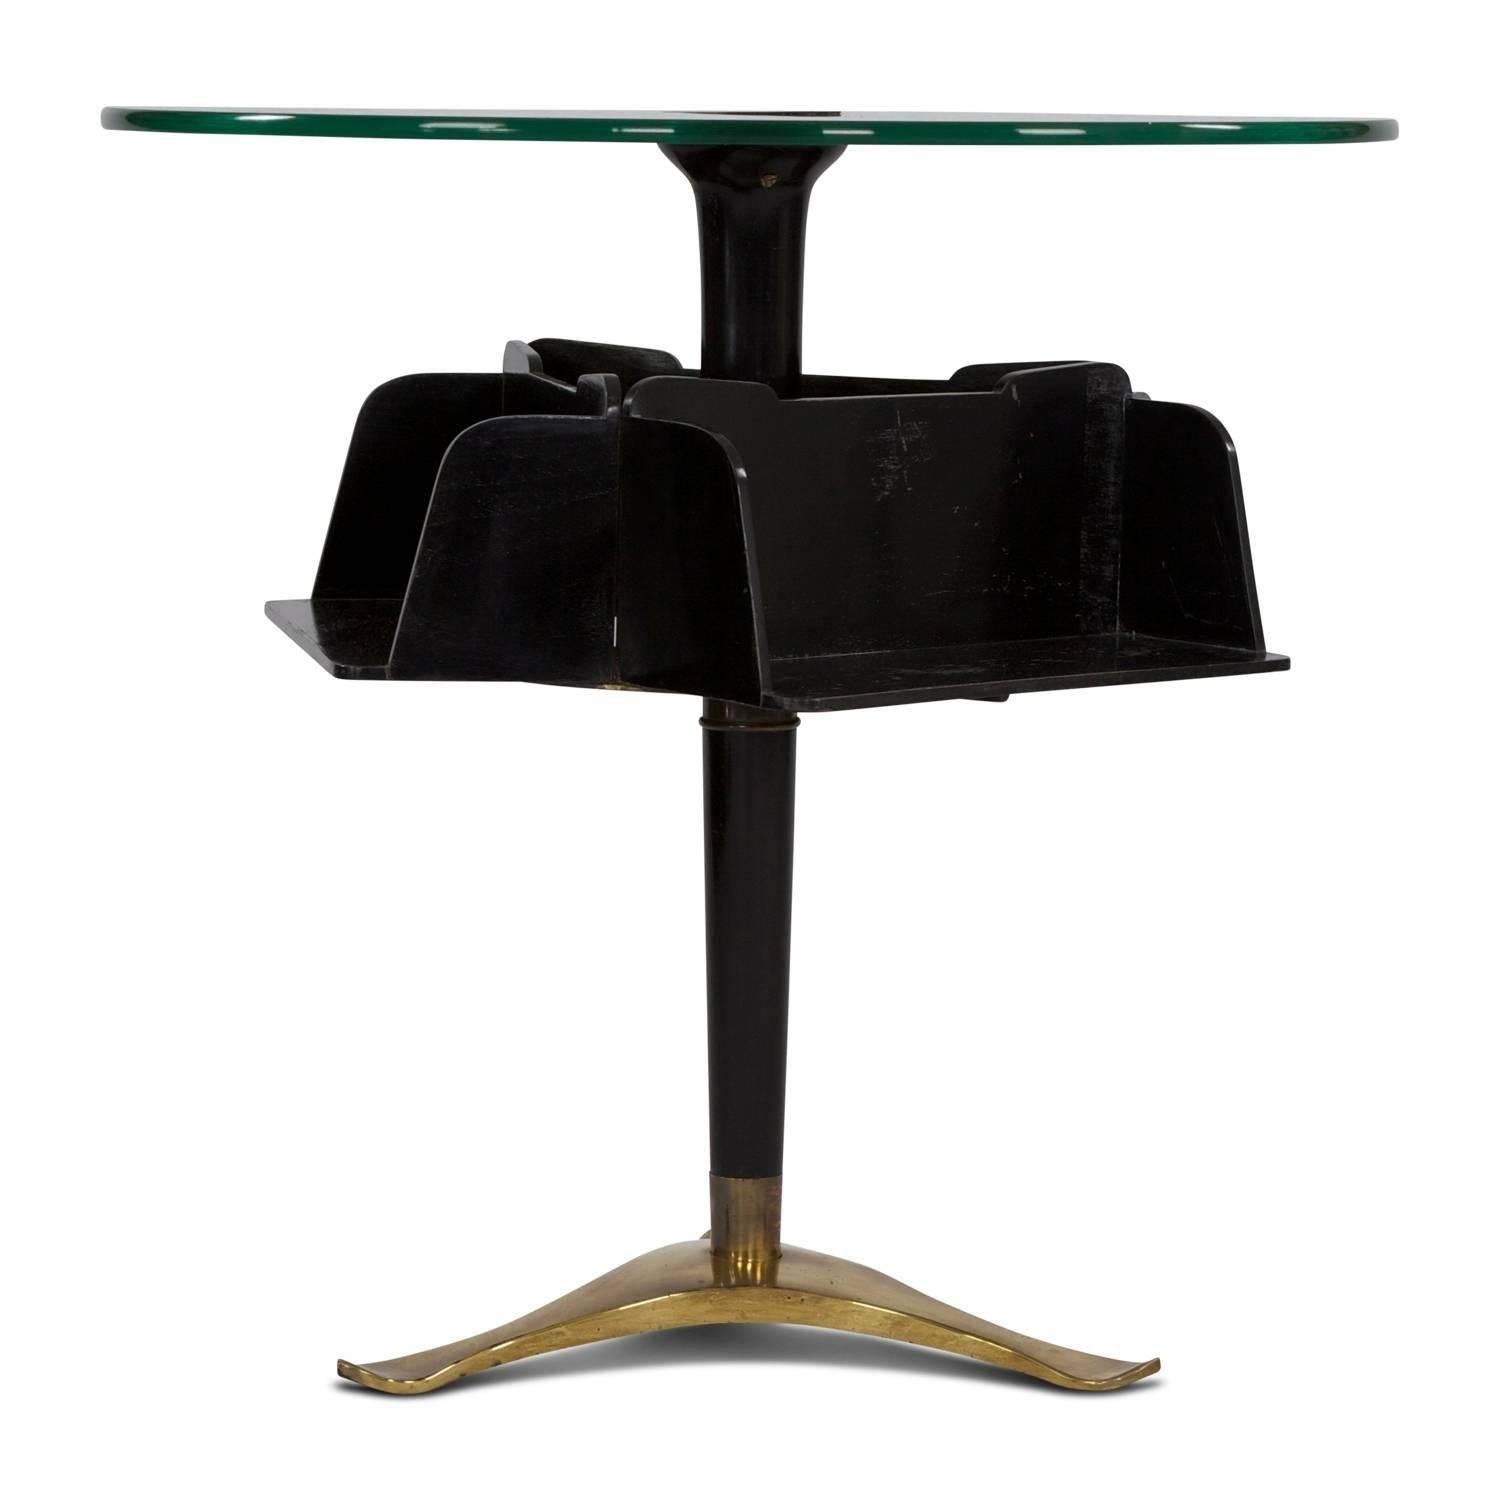 This side table was designed by Paolo Buffa in Italy in the 1940s. It has three shelves attached below the tabletop for book storage. This design element gives the table an extravagant appearance. The centre leg is mounted on a brass base. It is in